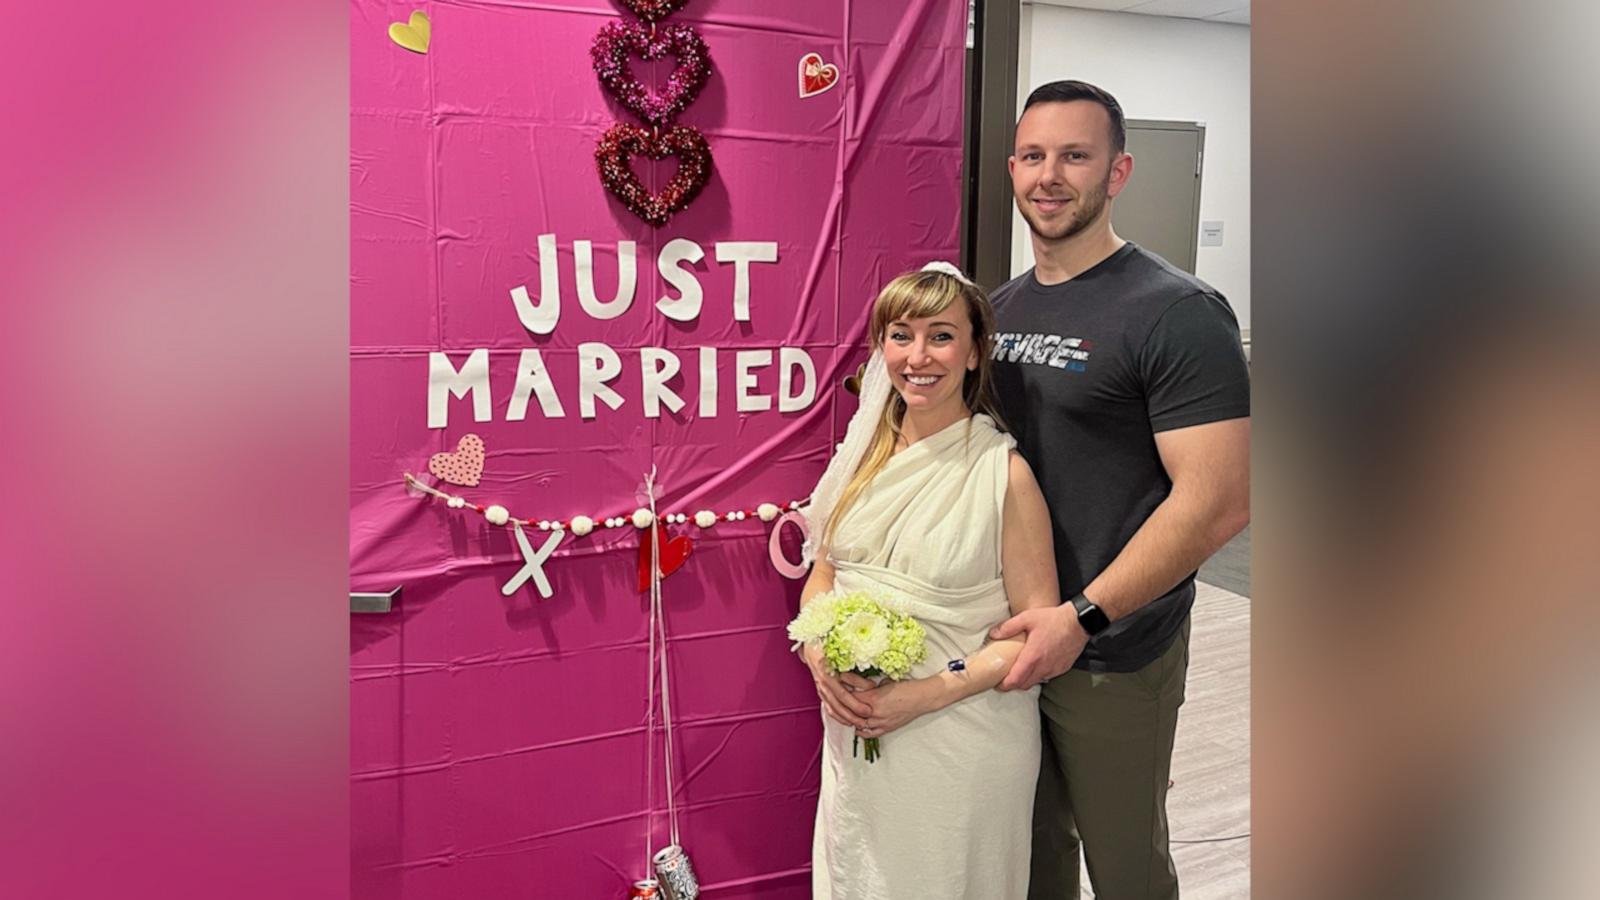 VIDEO: Couple marries at hospital hours before welcoming newborn